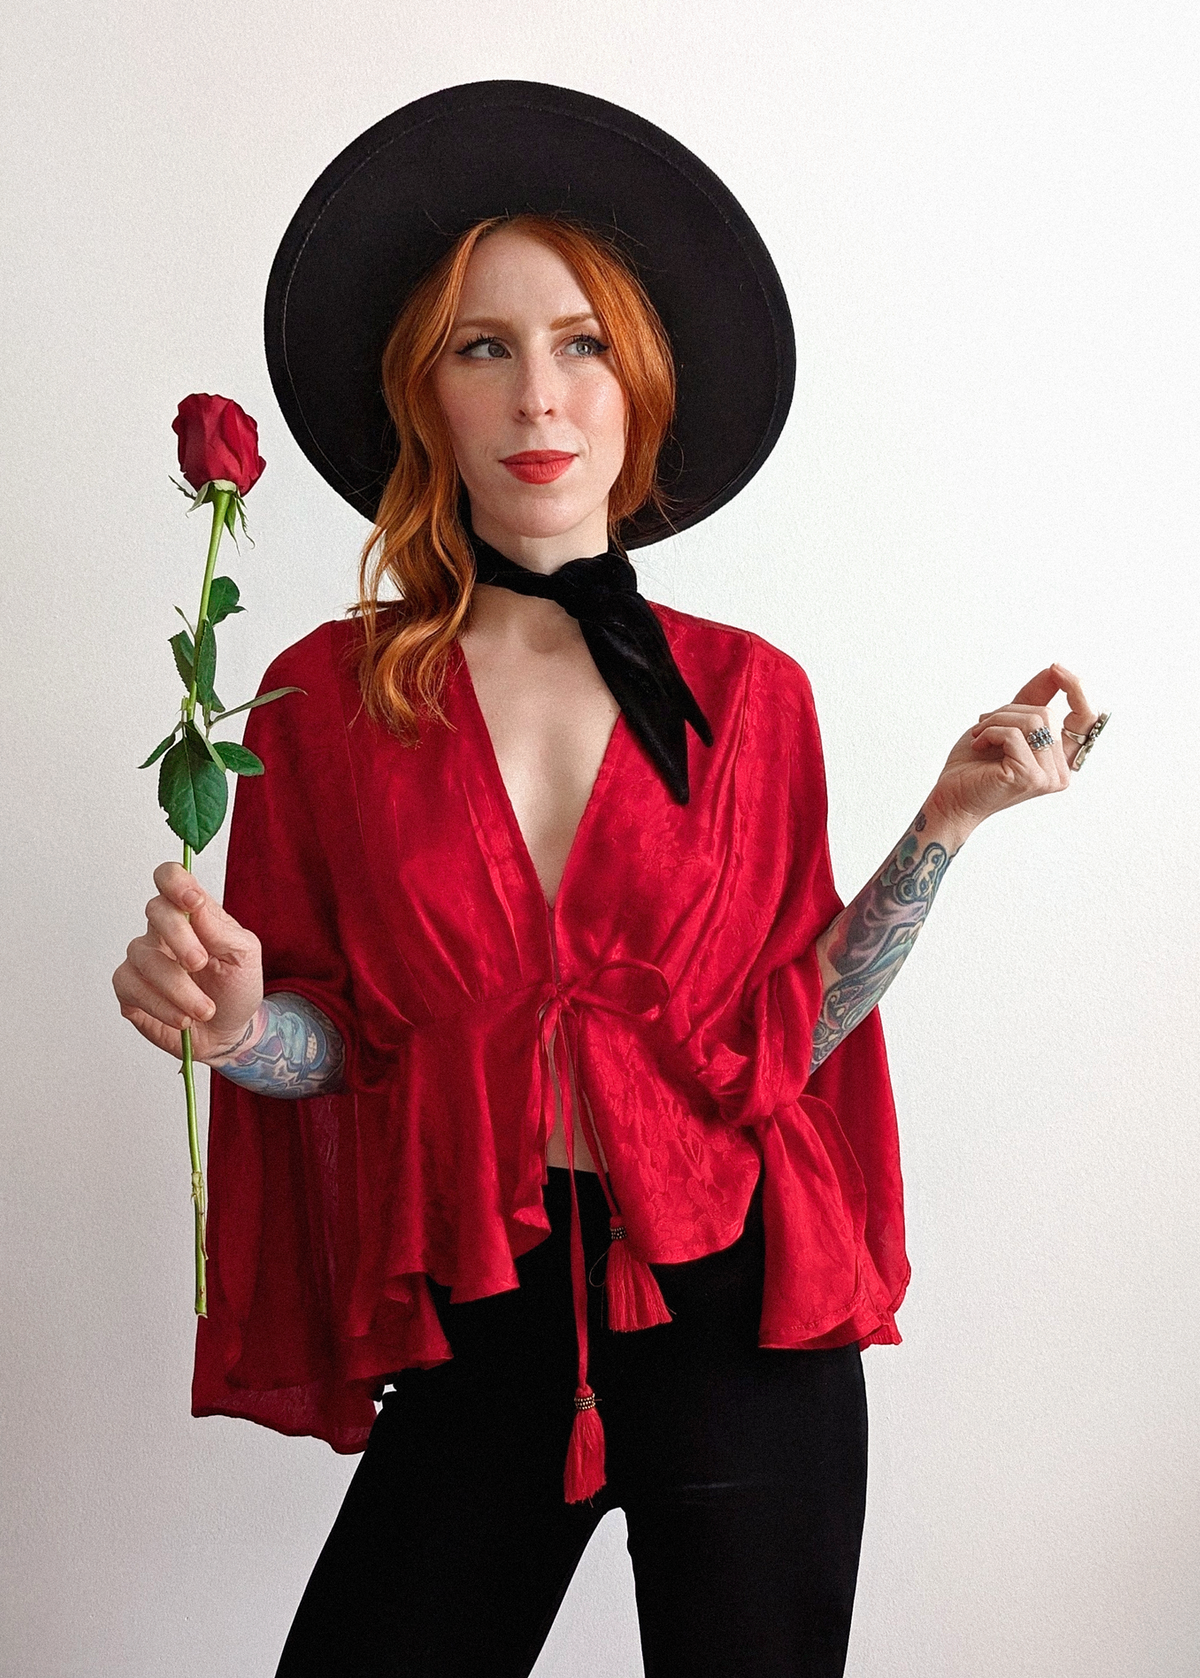 70s inspired ruby red satin batwing cape top with deep v-neckline and tonal floral pattern throughout the red satin fabric. Tassel tie details at front and red lace at back